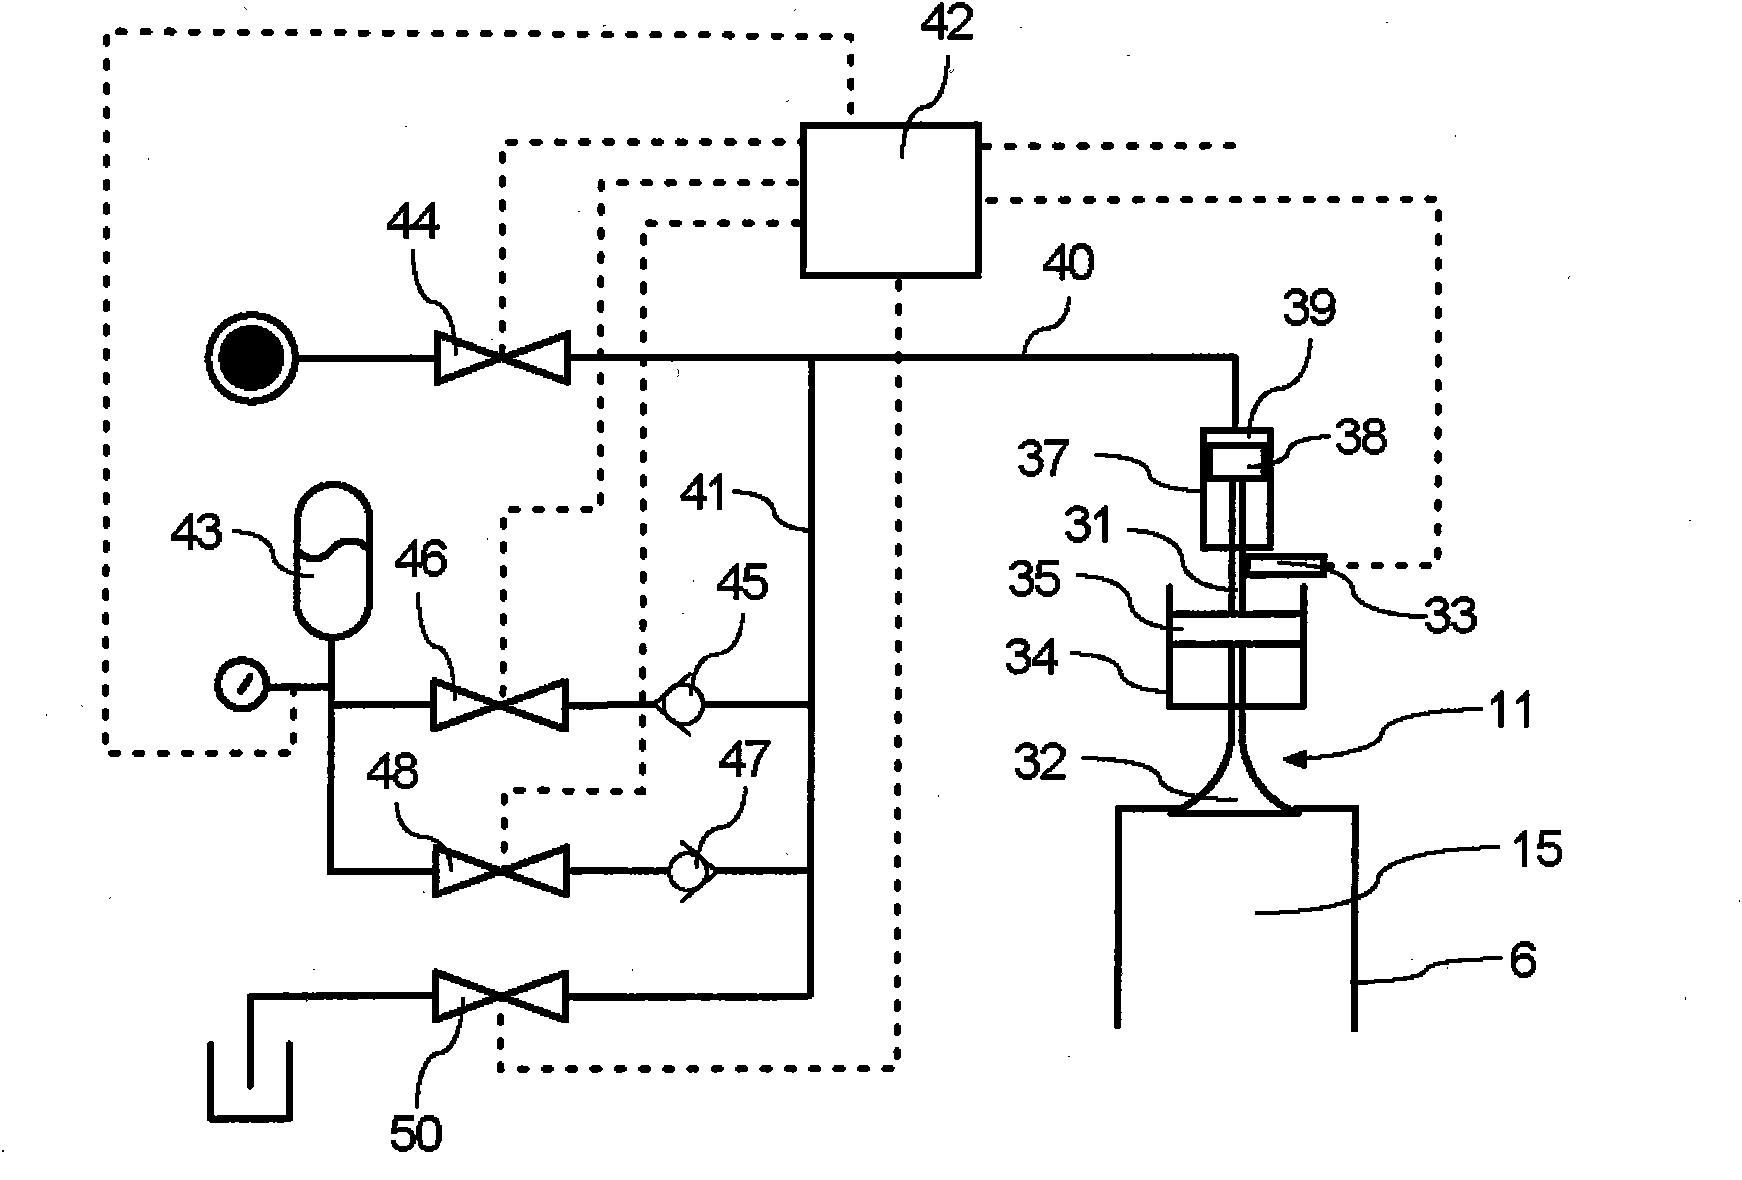 Large two-stroke diesel engine with electronically controlled exhaust valve actuation system